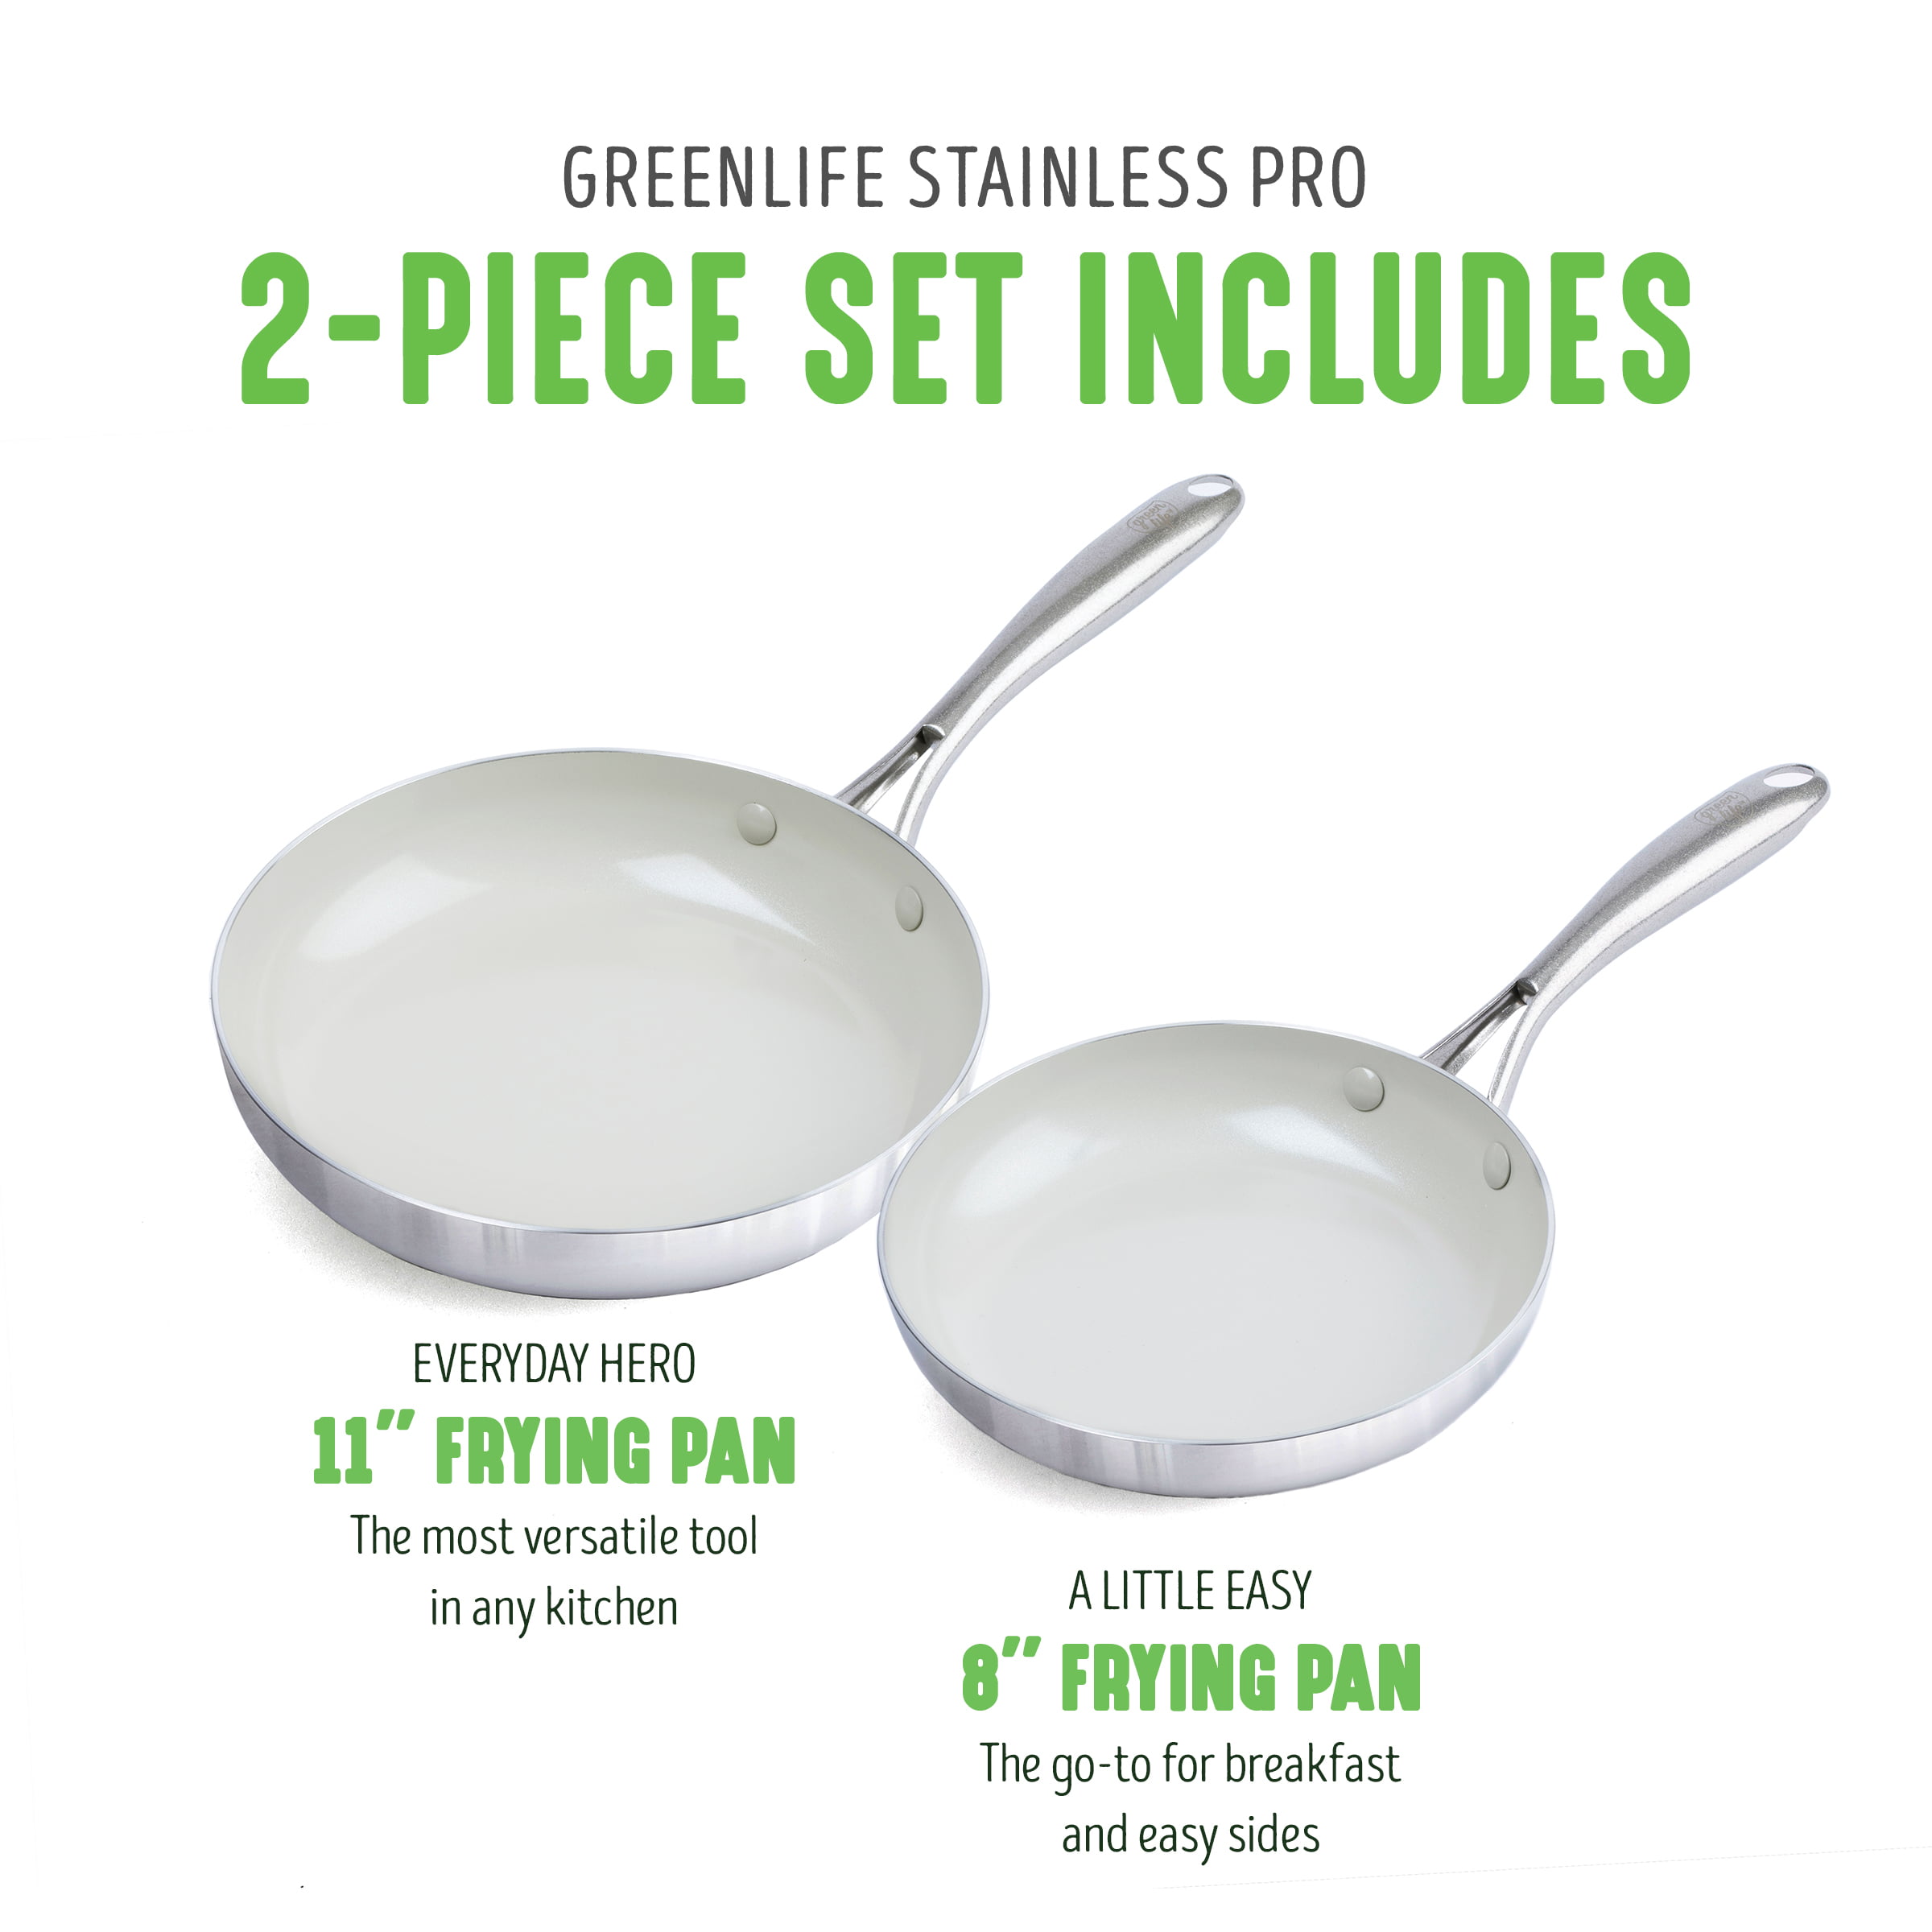 GreenLife Tri-Ply Stainless Steel Healthy Ceramic Nonstick,10 Piece  Cookware Set, PFAS-Free, Multi Clad, Induction, Dishwasher Safe, Oven Safe,  Silver 